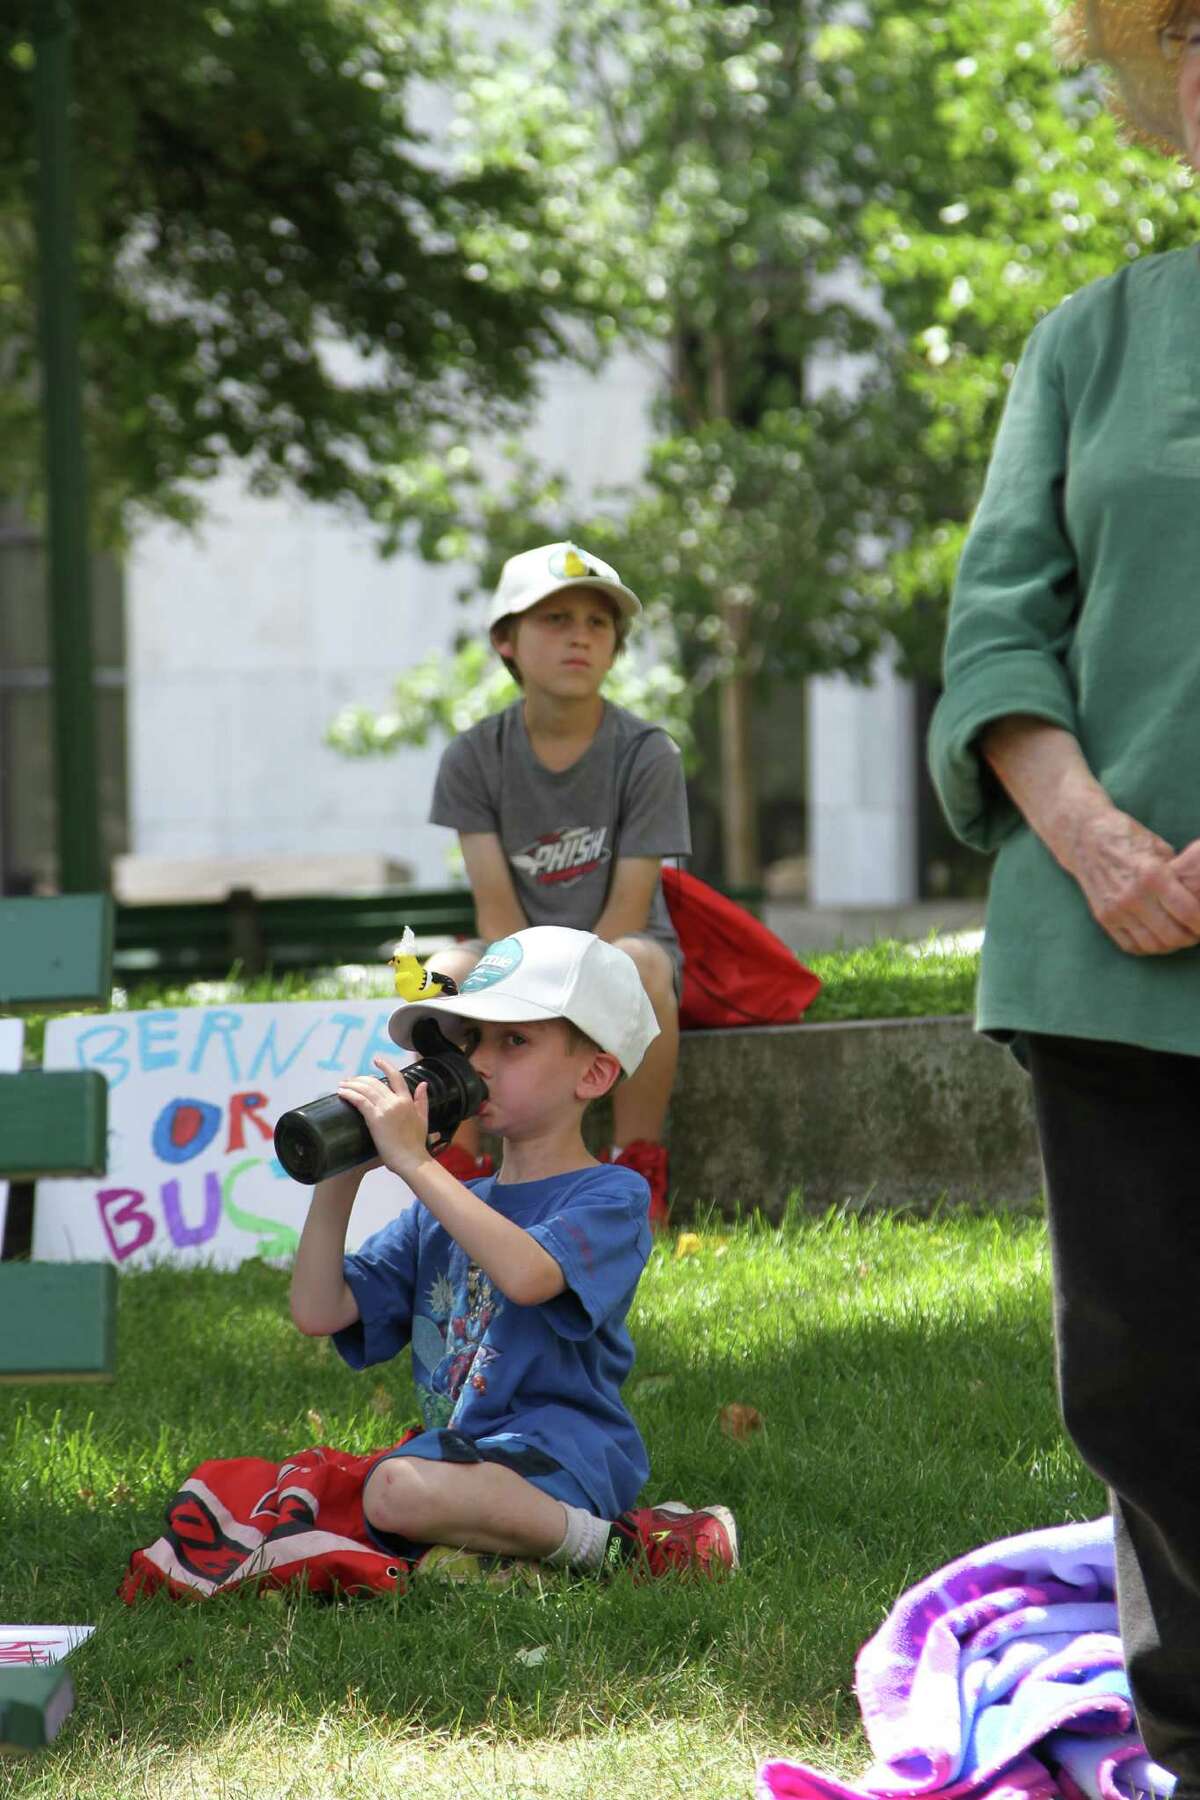 Koby Ross, 7, and his brother Ari, 11, rest during a rally in Albany for Bernie Sanders Sunday, July 24. The Ross family, from Monroe, N.Y., drove two hours for the rally. (Photos: J.p Lawrence).